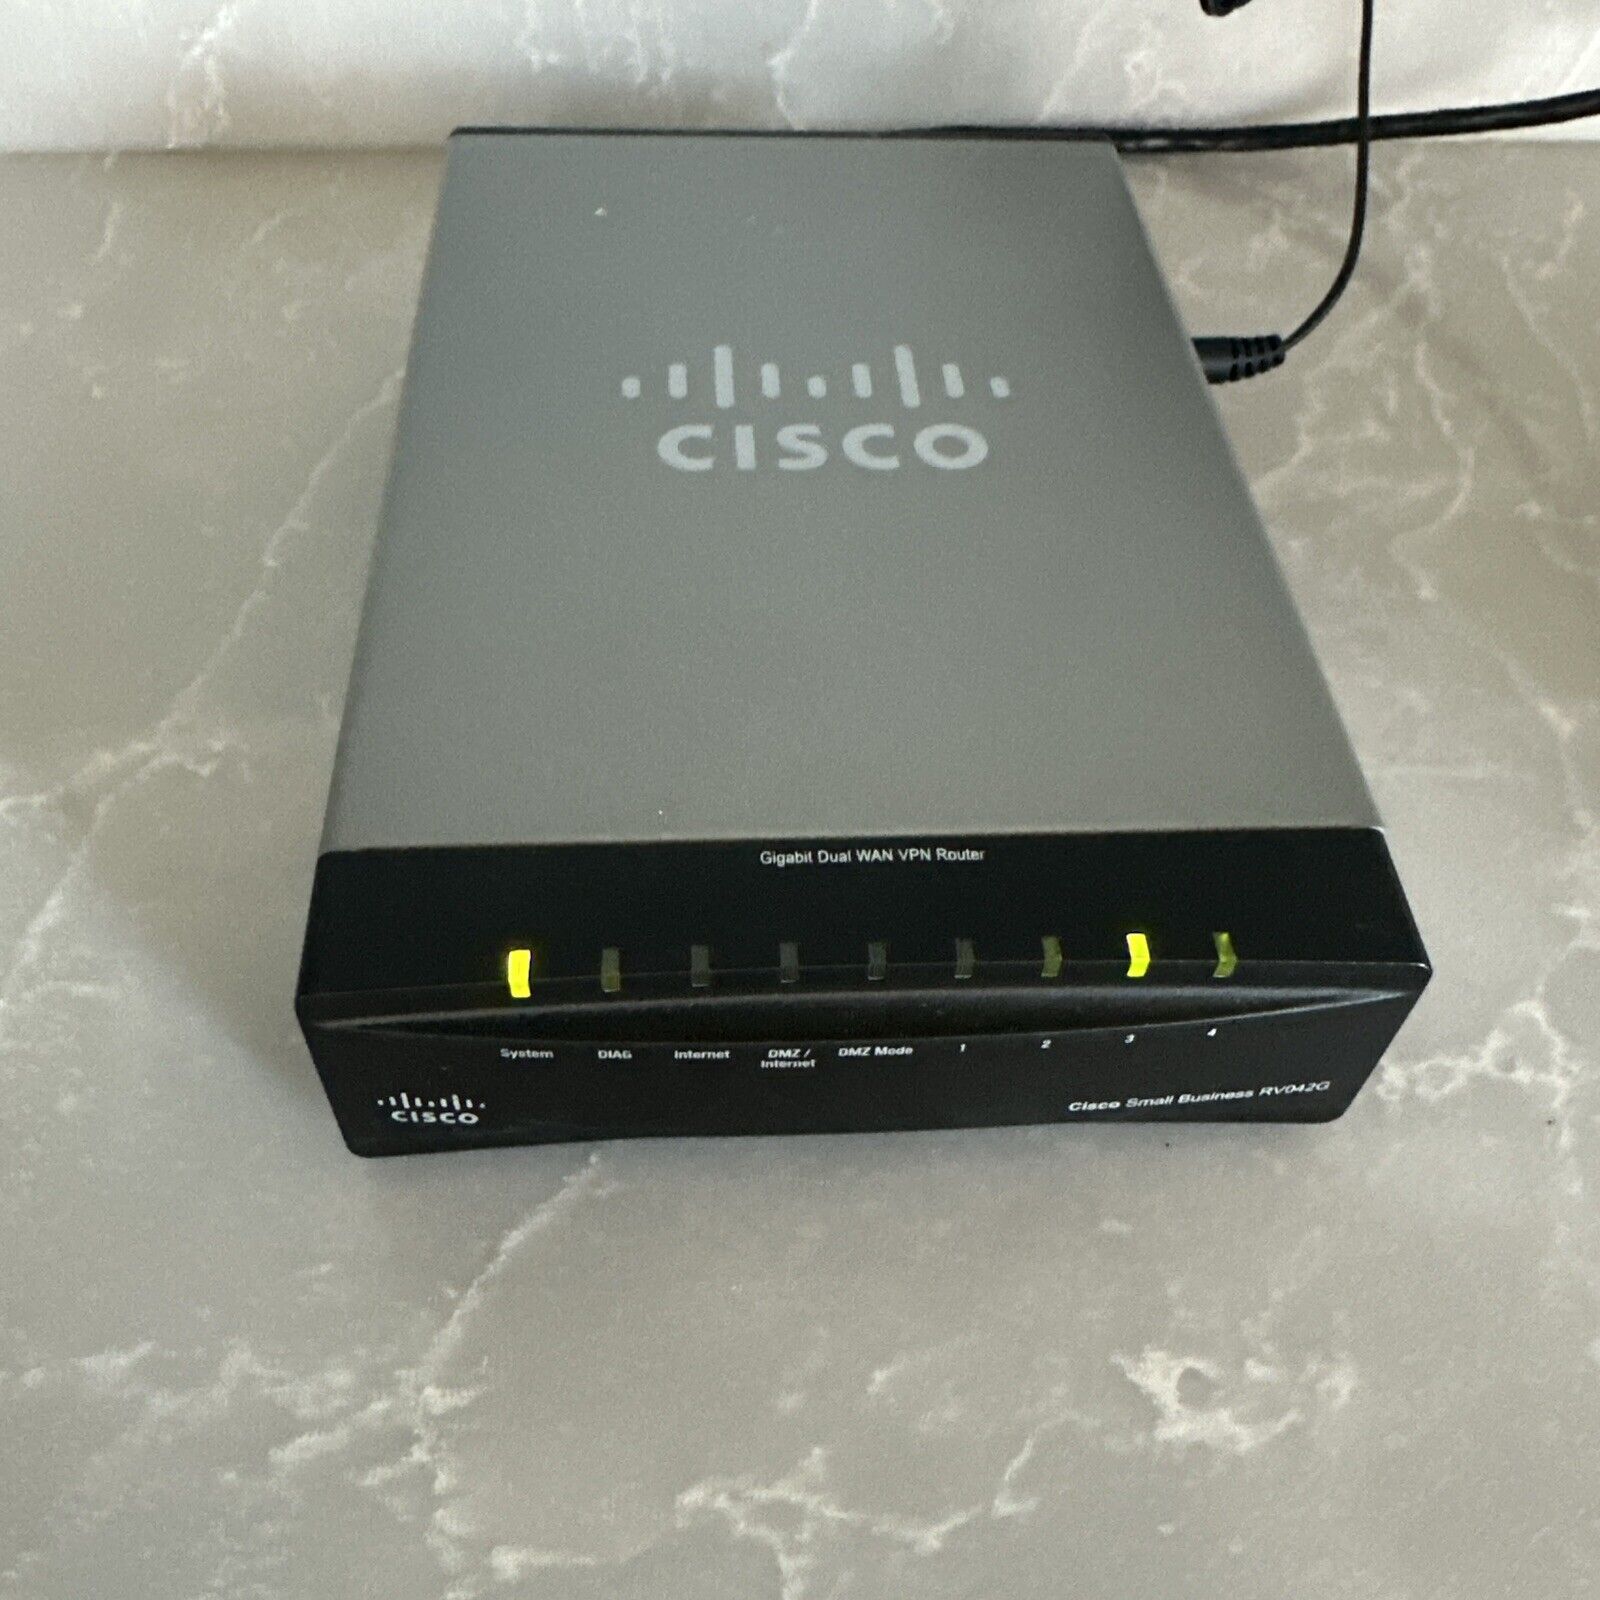 Network Security Firewall VPN Router Cisco RV042G V01 Dual WAN - Tested